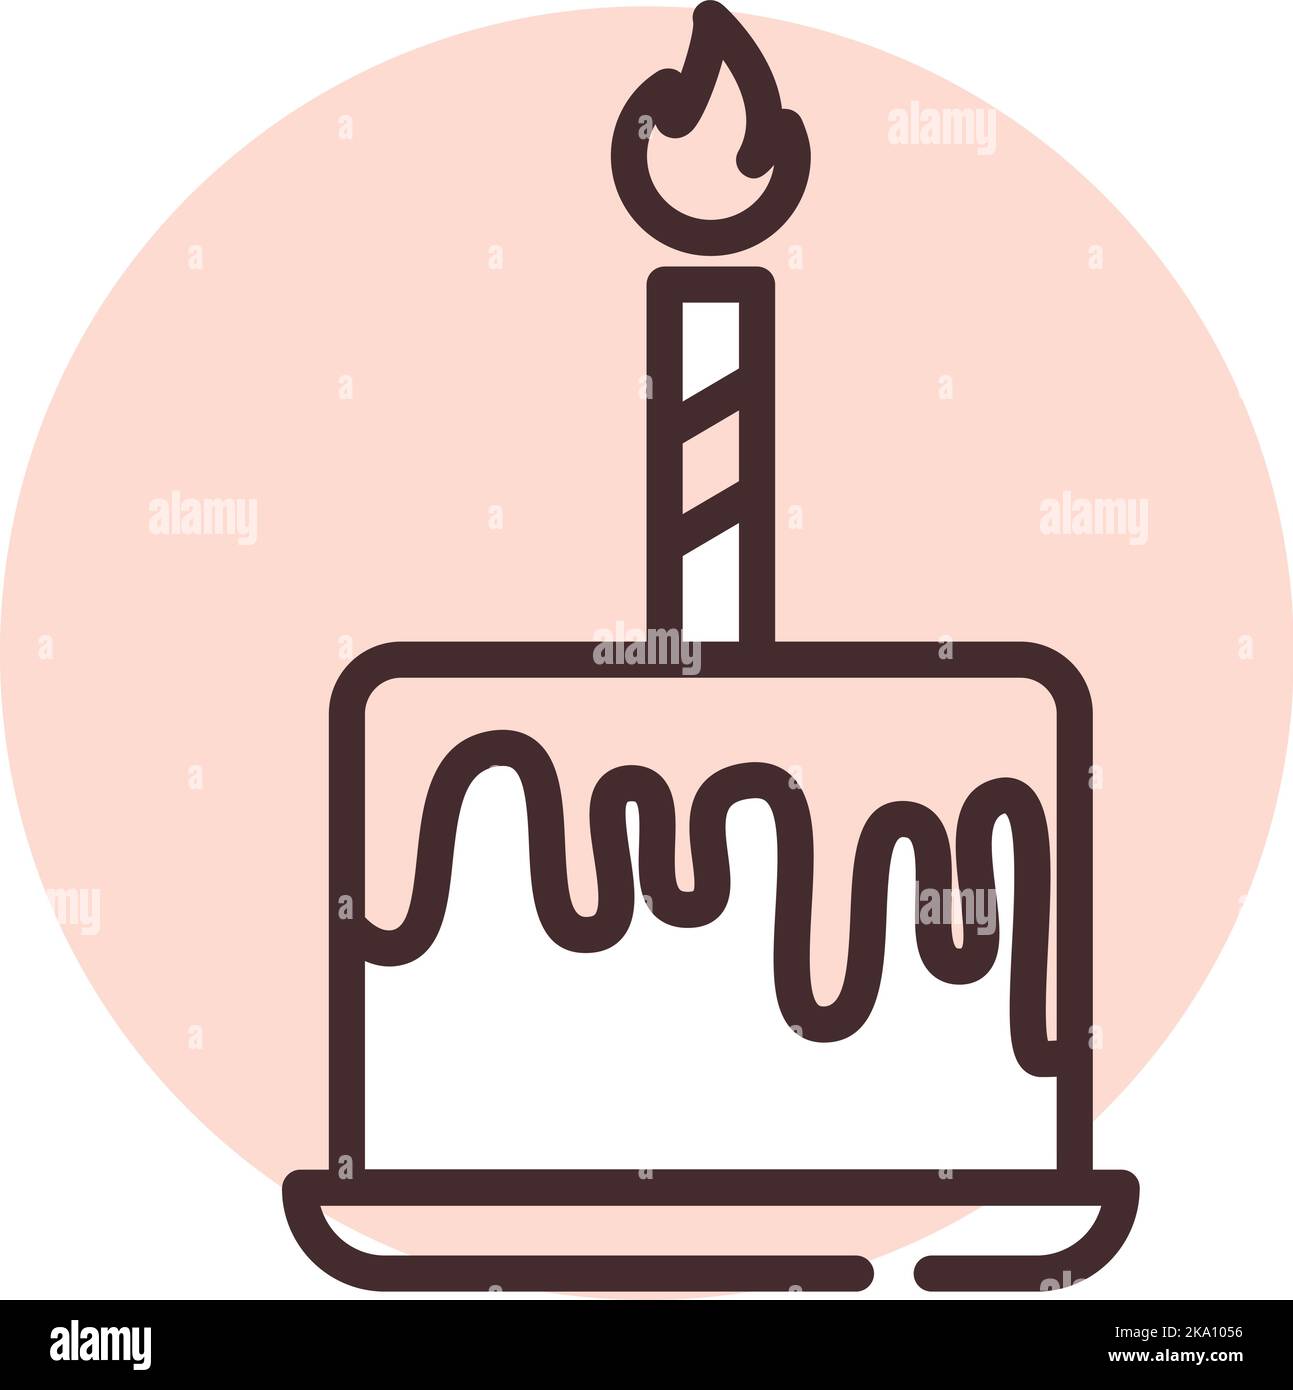 Event birthday cake, illustration or icon, vector on white background. Stock Vector